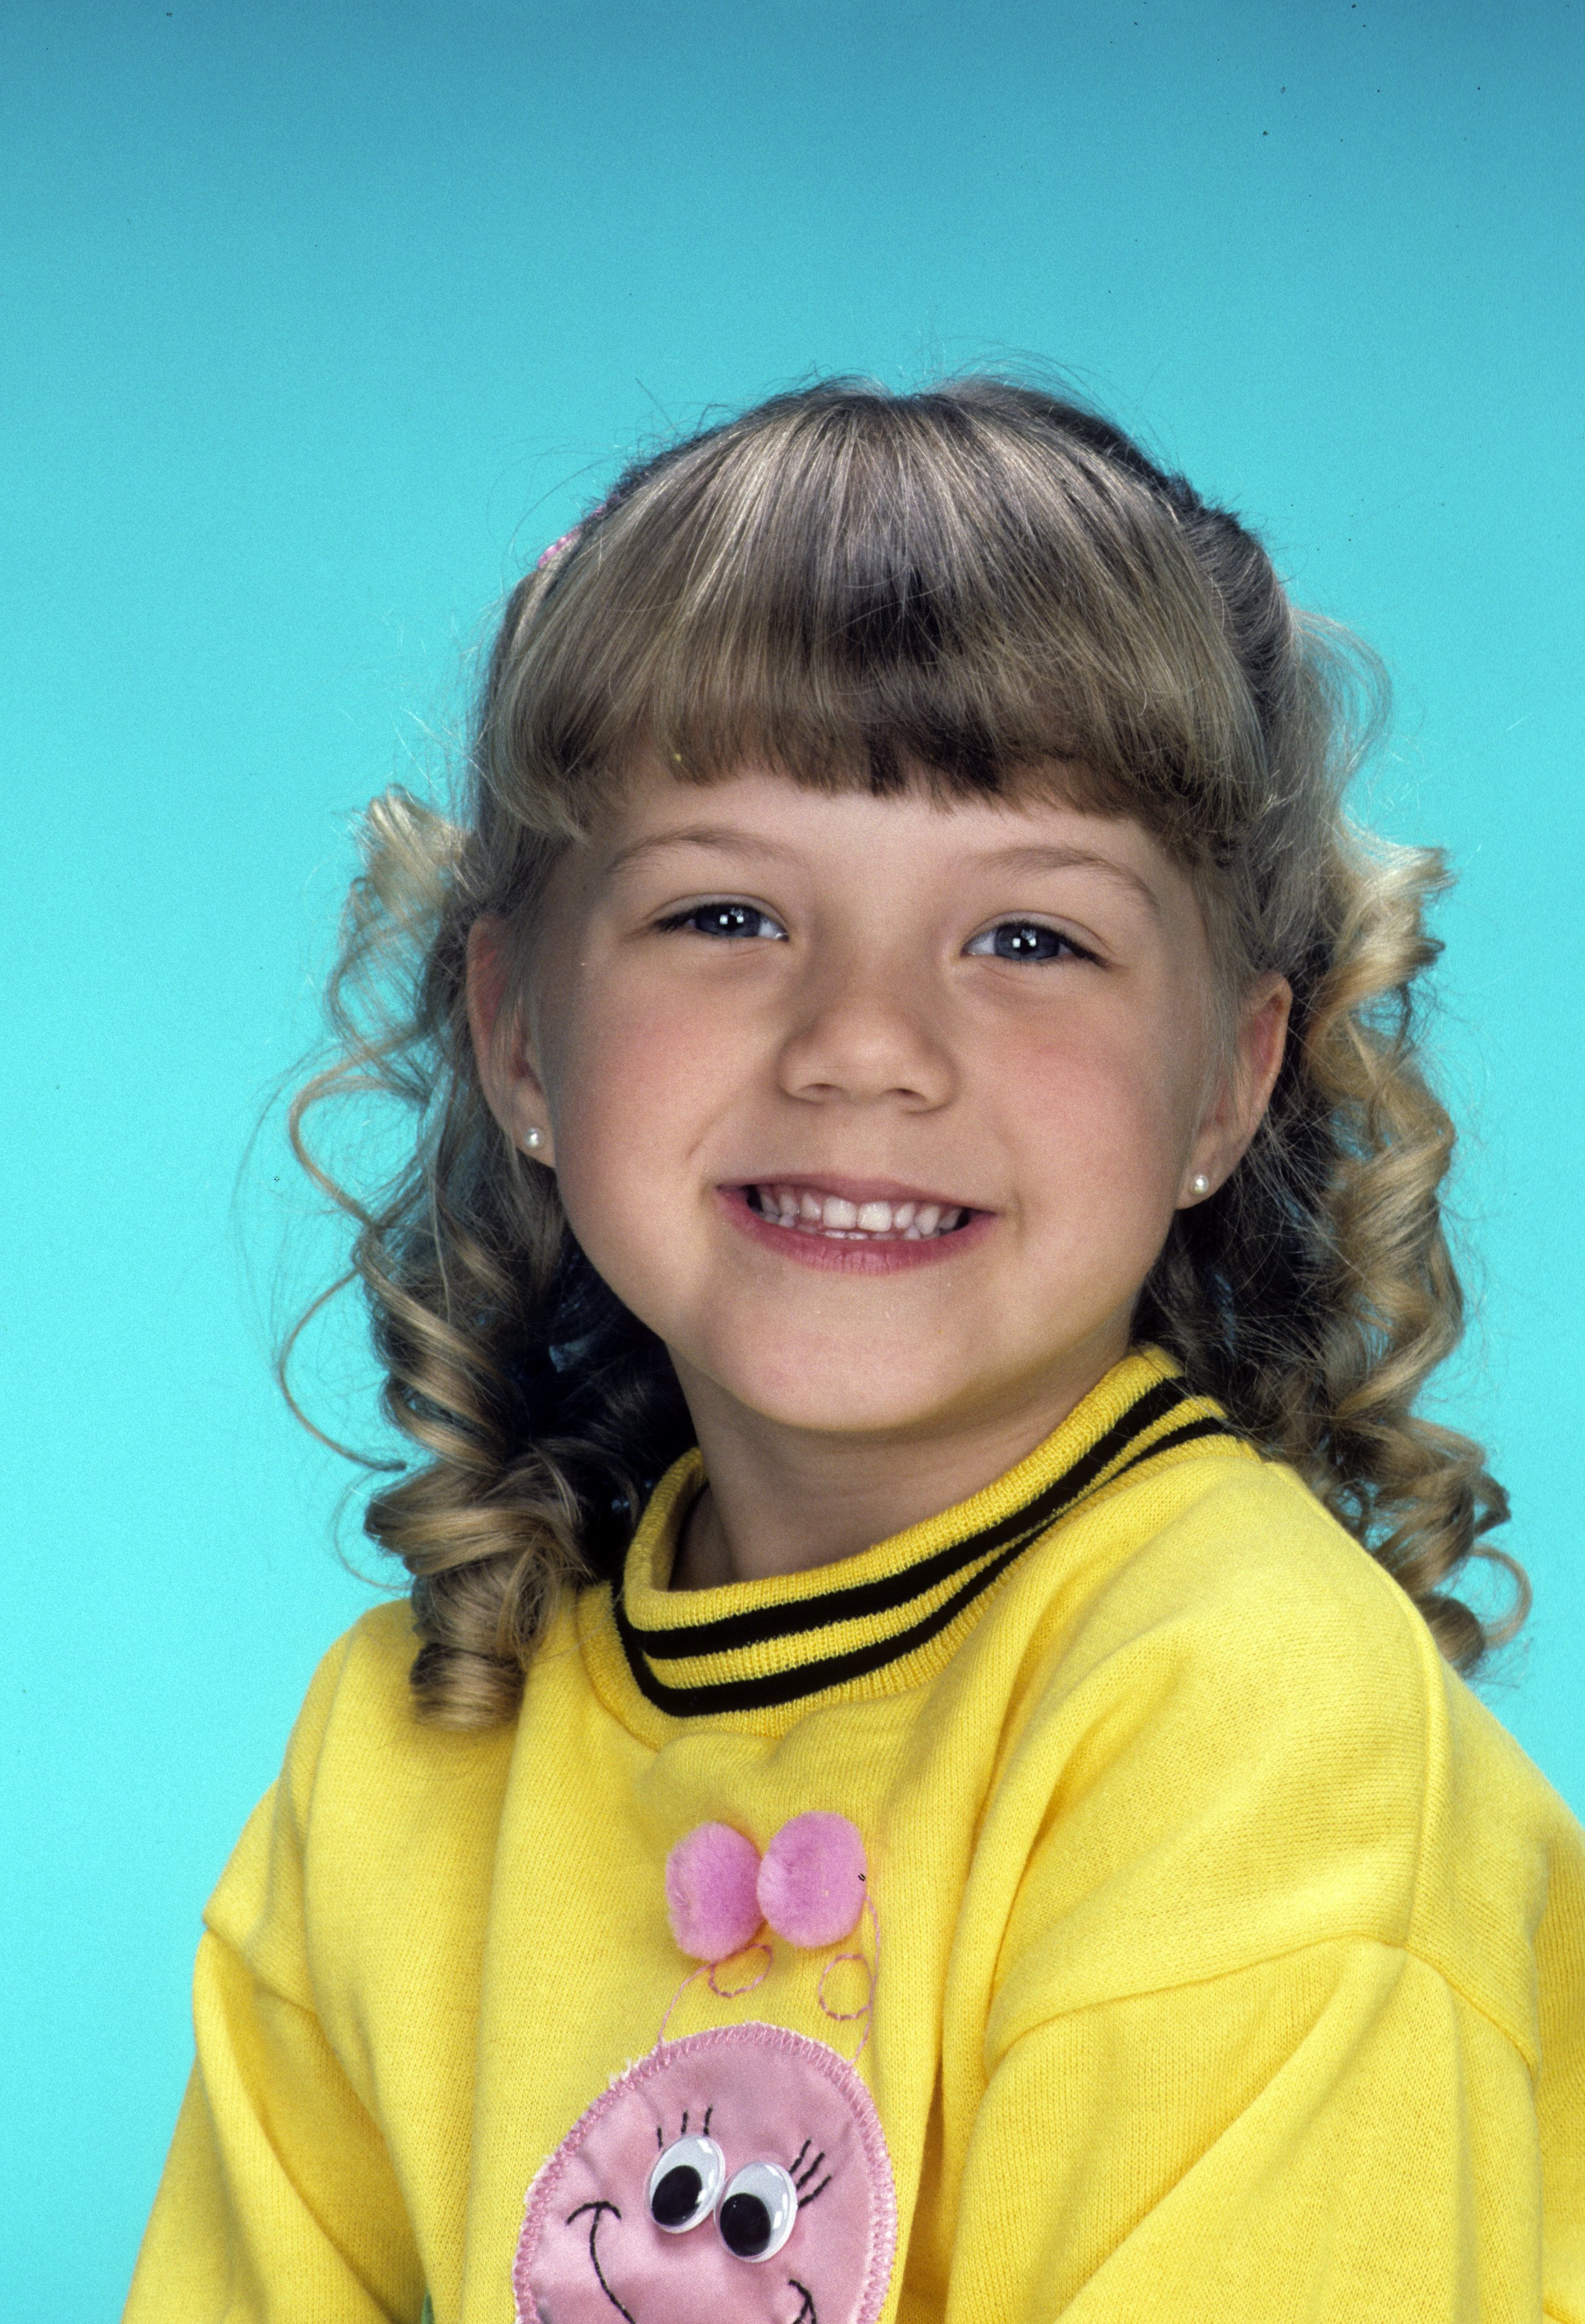 Portrait of Jodie Sweetin as Stephanie Tanner on the 1987 sitcom "Full House." | Source: Getty Images